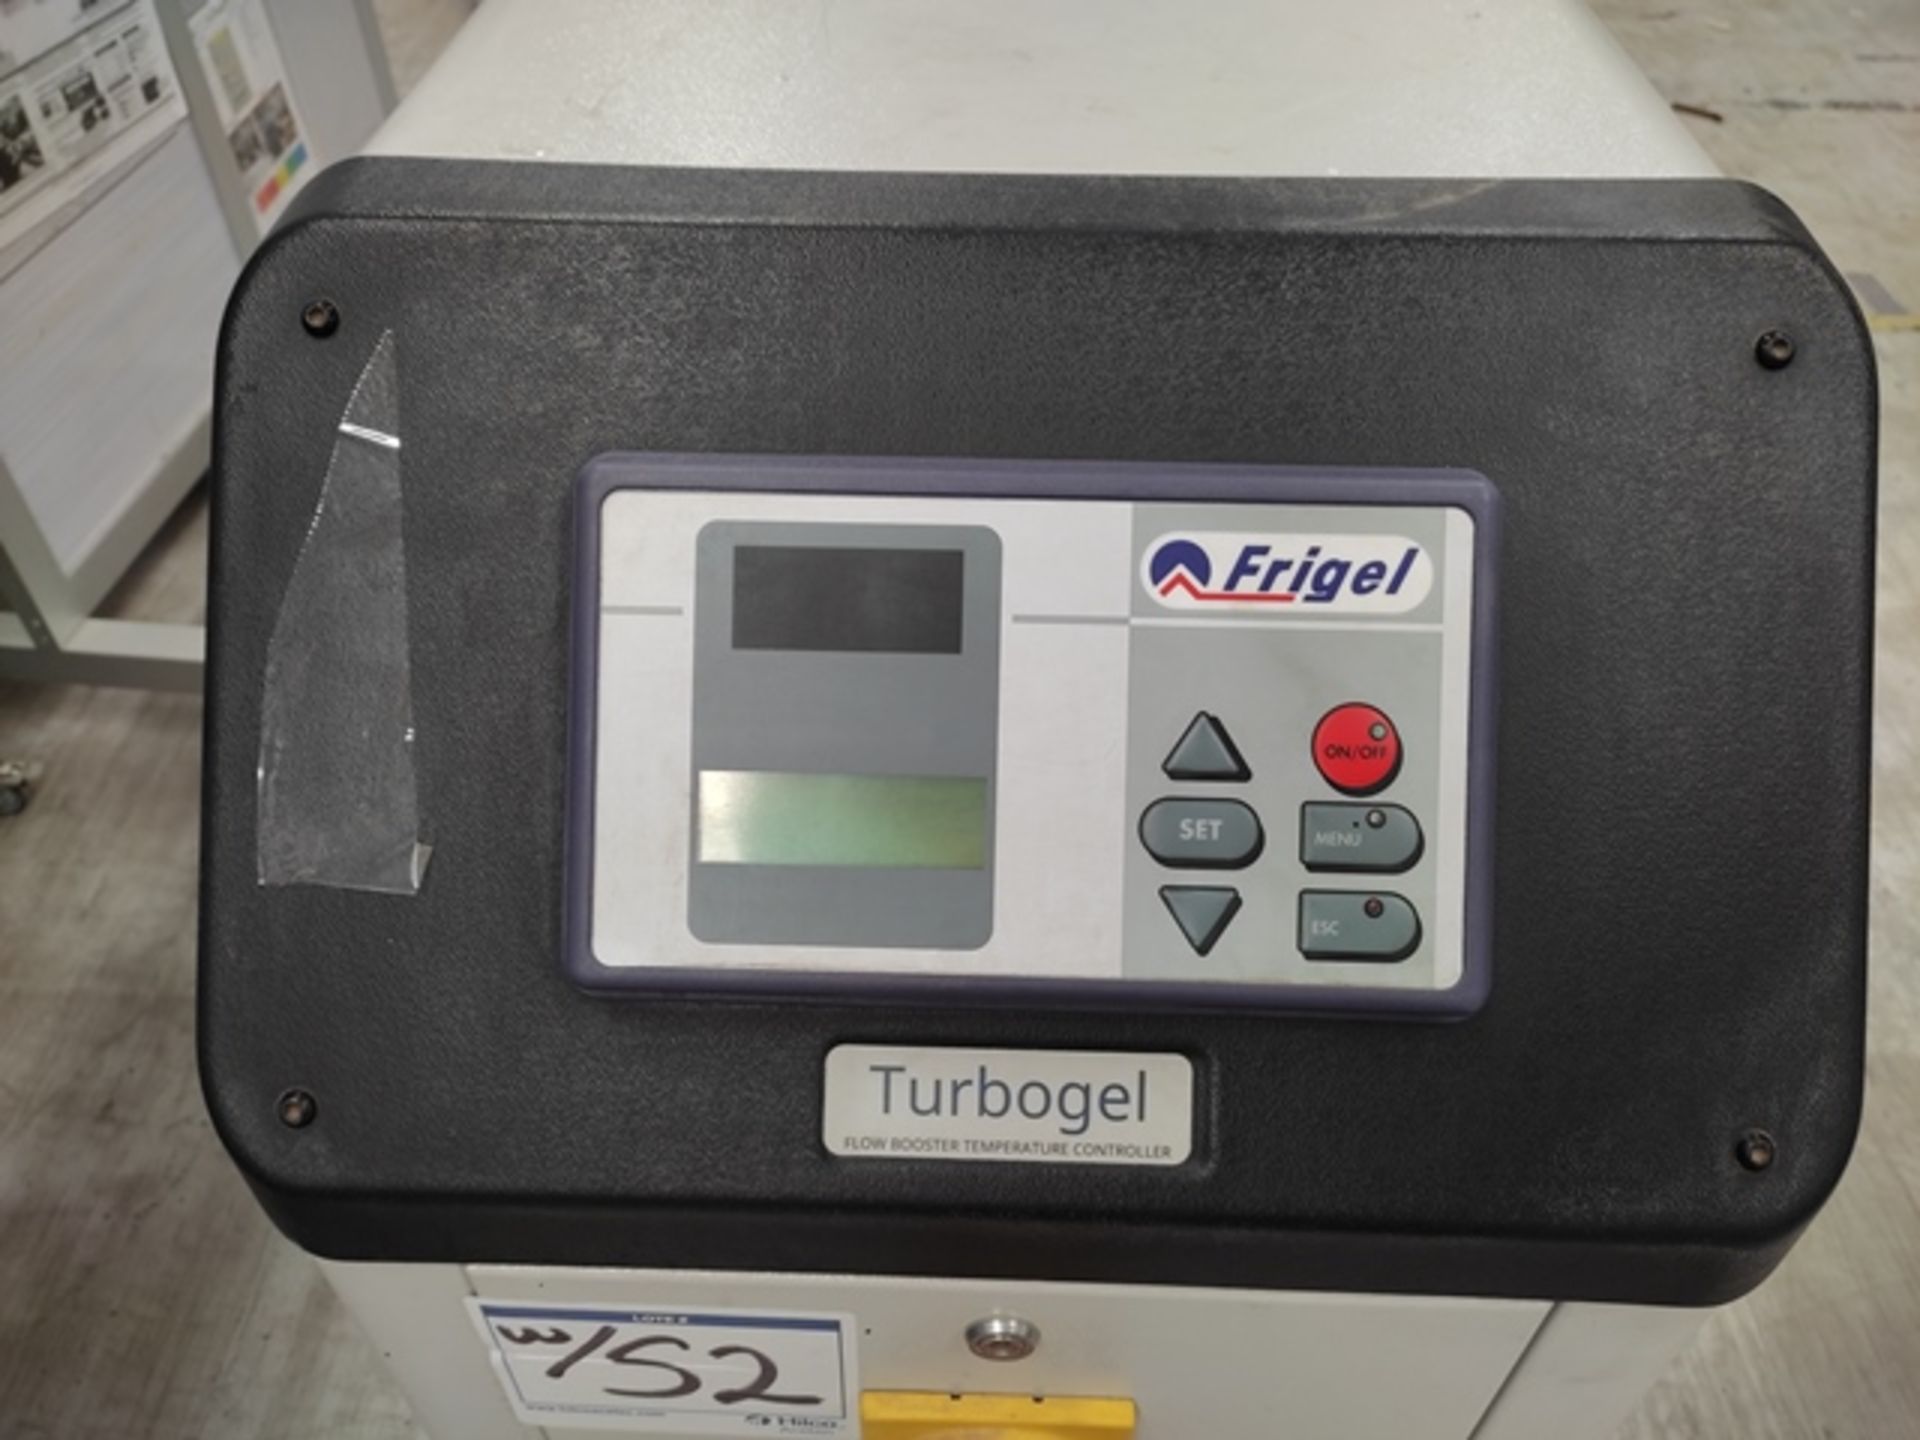 Lot of: (3) Frigel RBD130/24 SP 24 KW Flow Booster Temperature Controller, Year: 2017; - Image 13 of 16